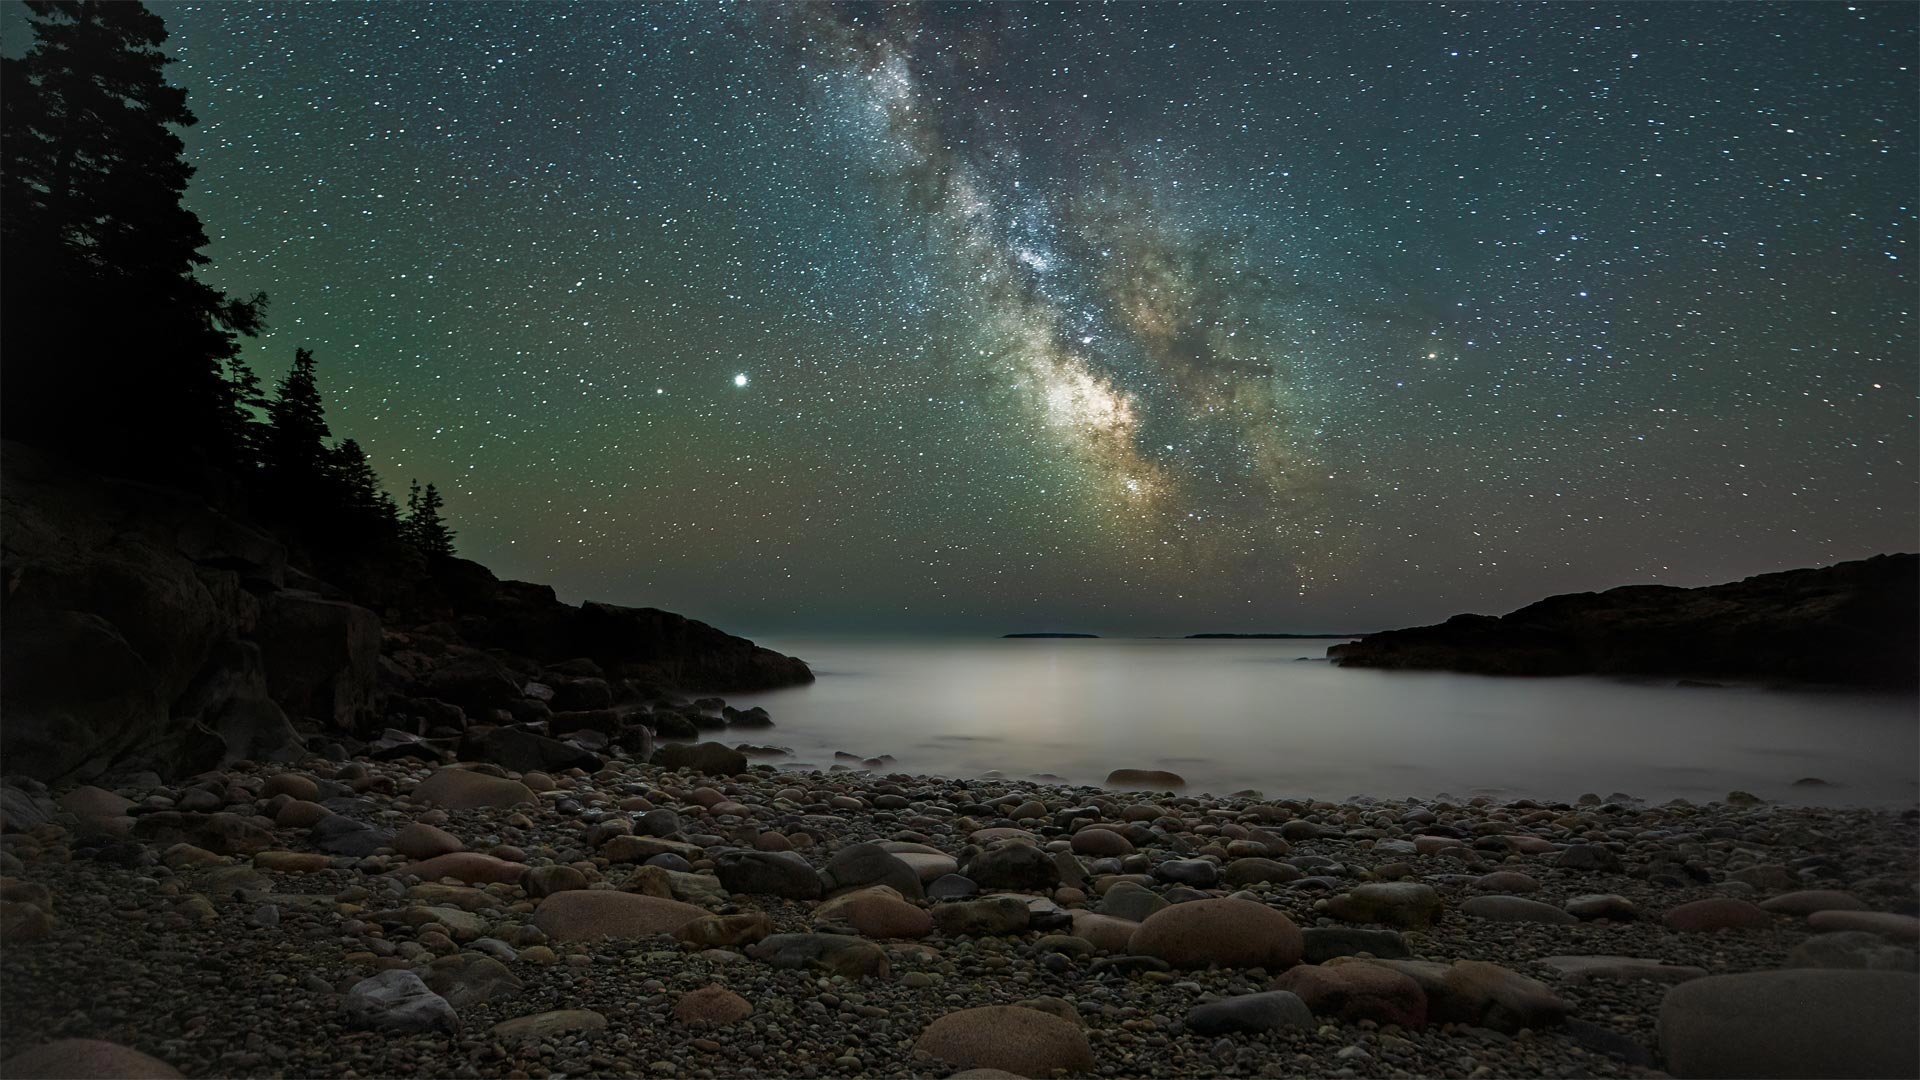 Milky Way over Acadia National Park, Maine - Harry Collins/Getty Images)